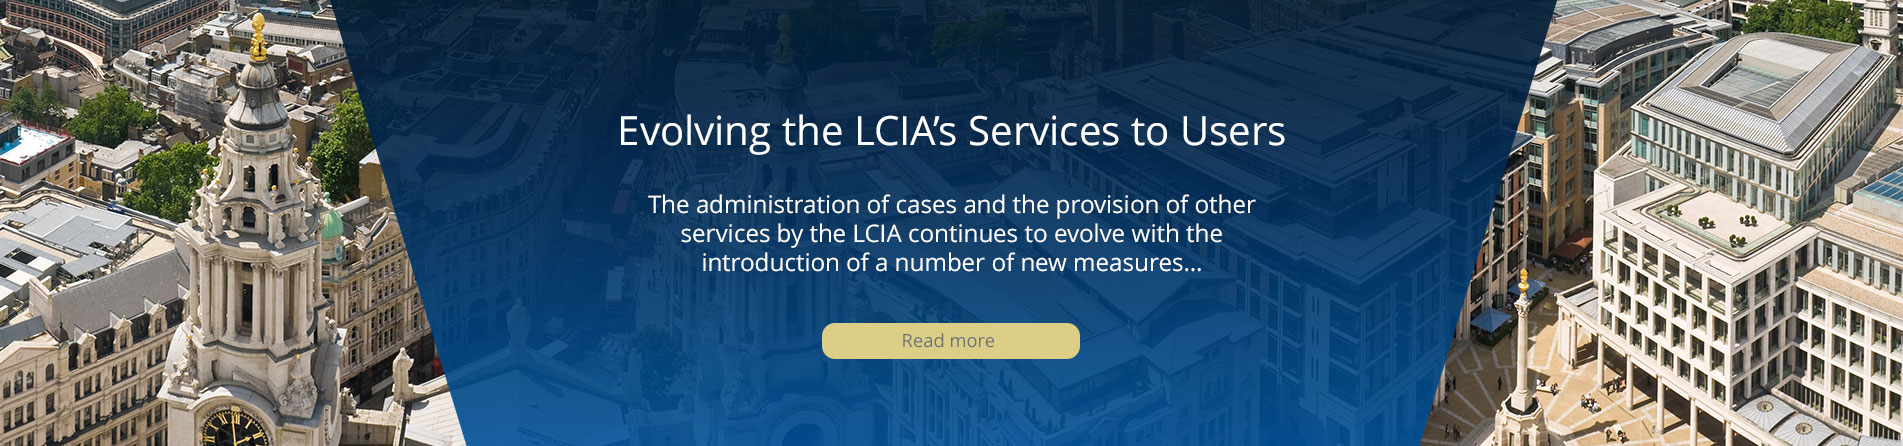 Evolving the LCIA’s Services to Users